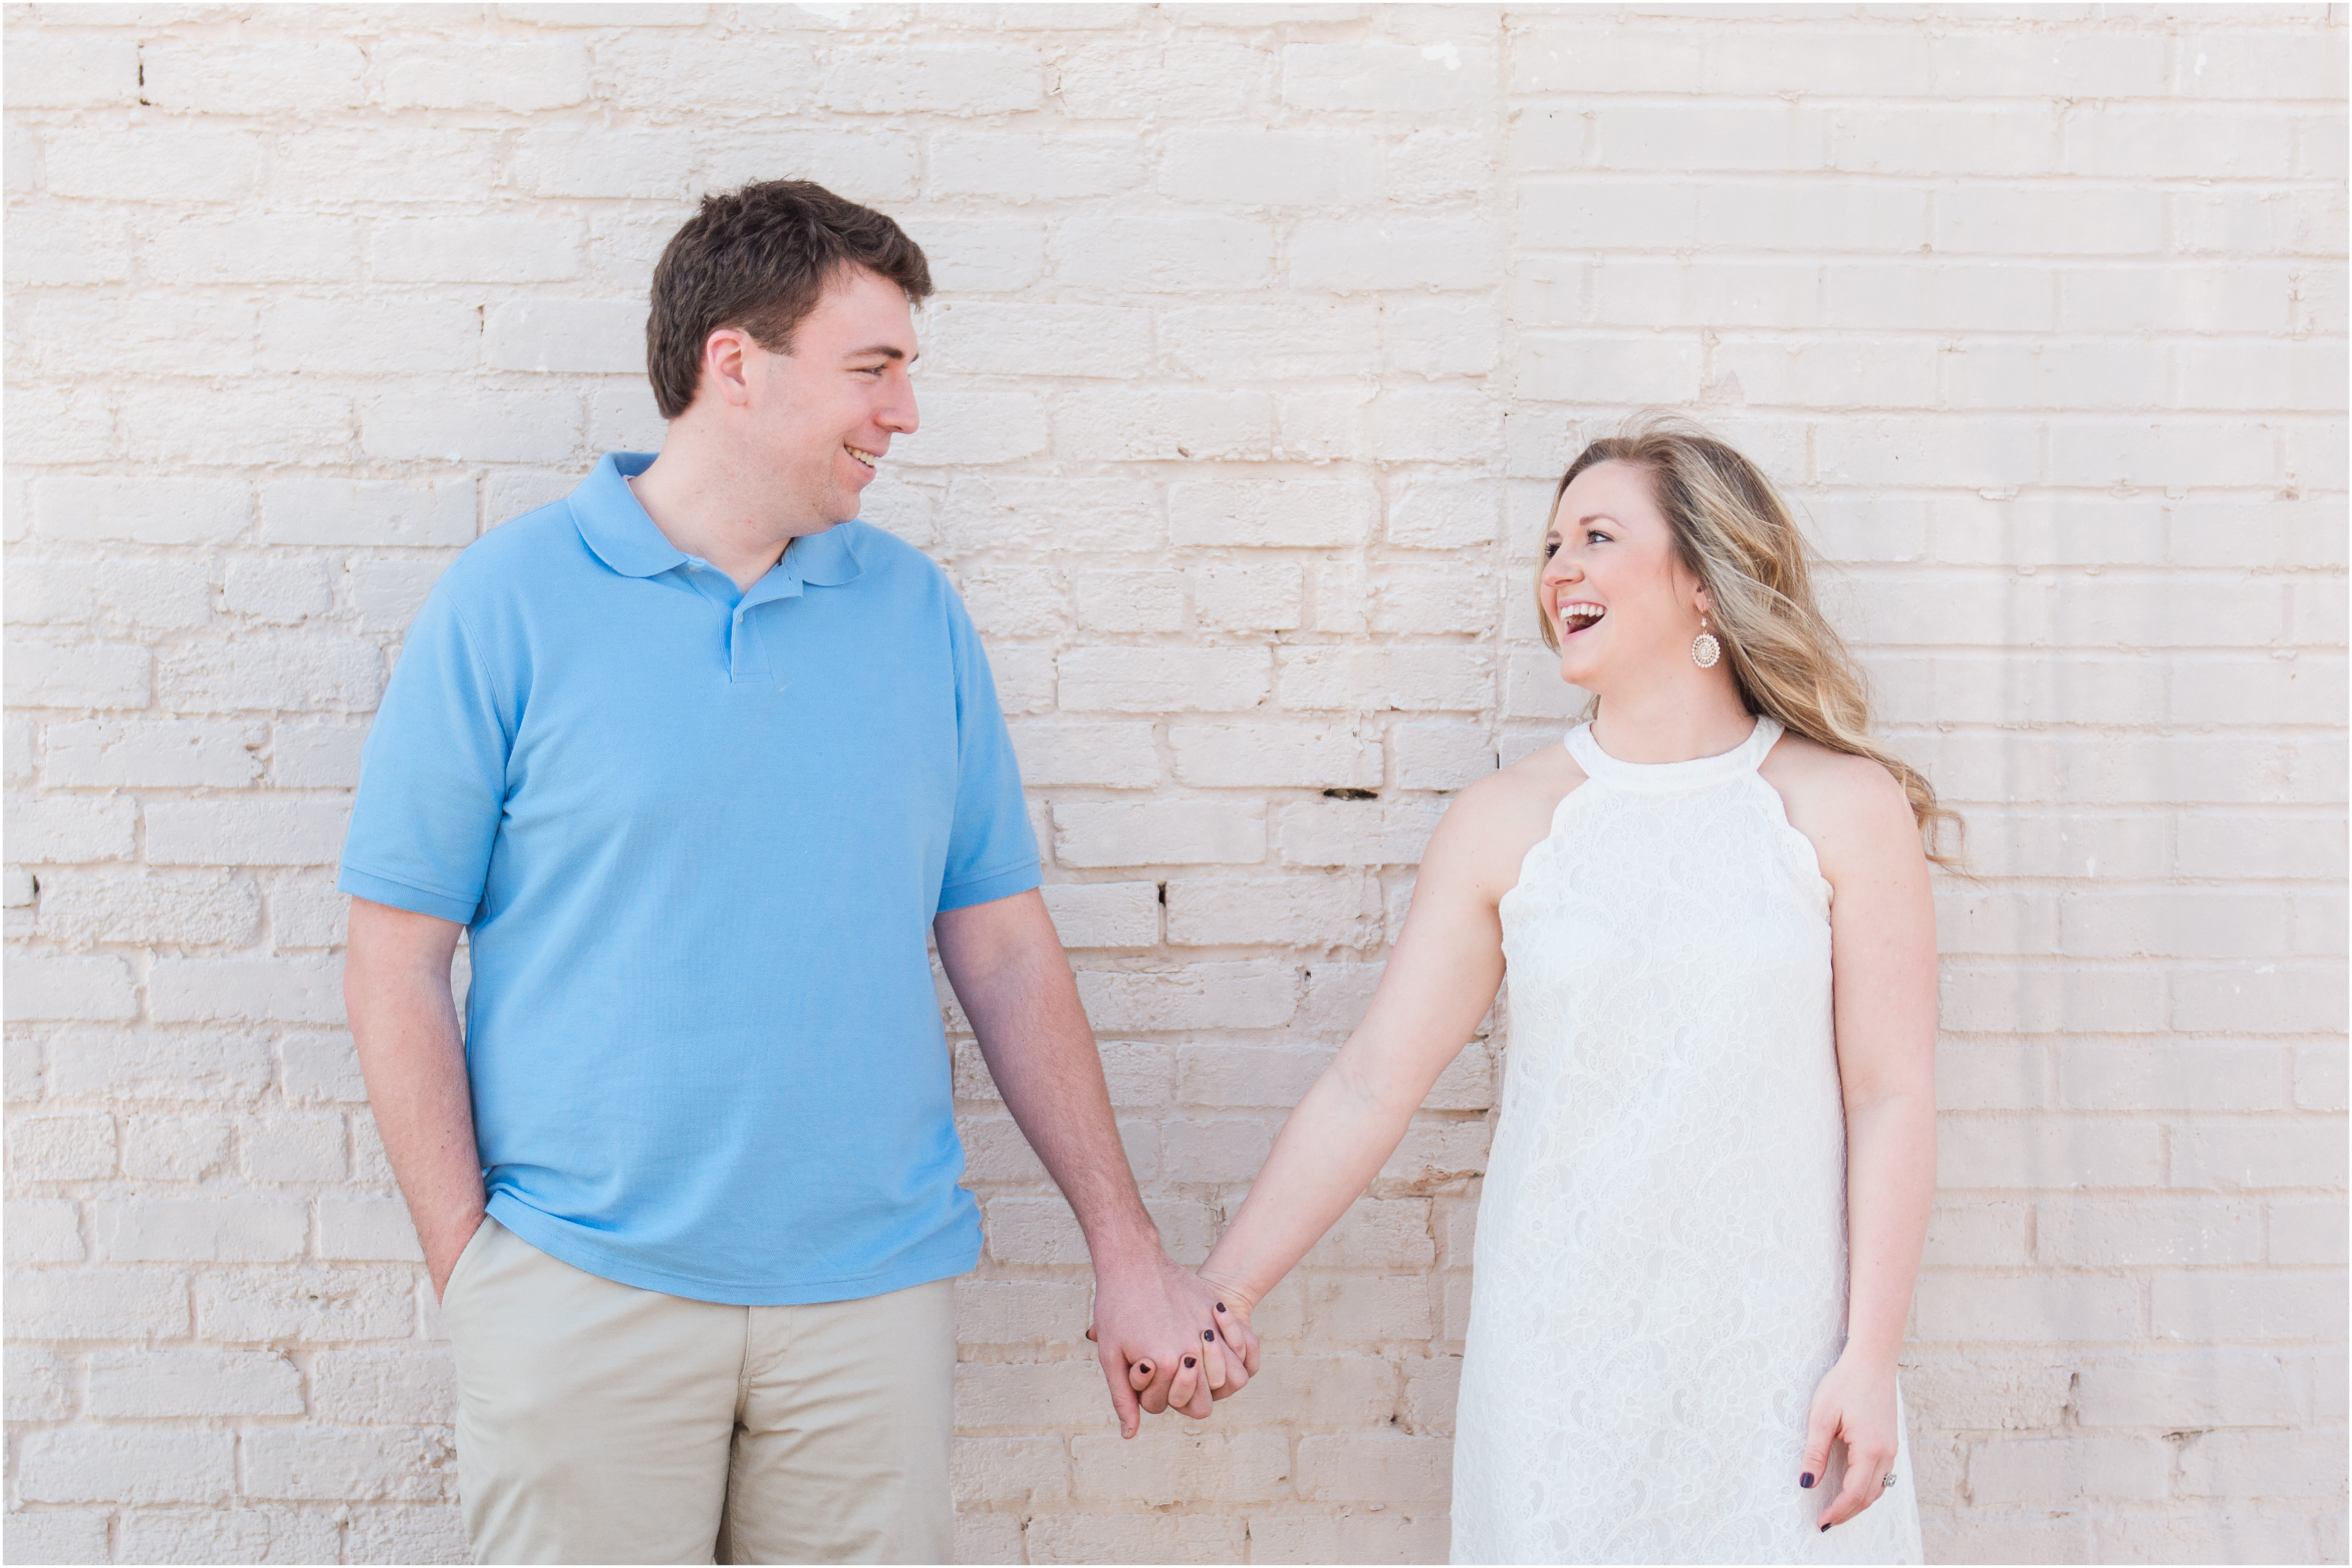 Engagement Photography Tips and inspiration. Downtown Woodruff, SC Engagement Session.